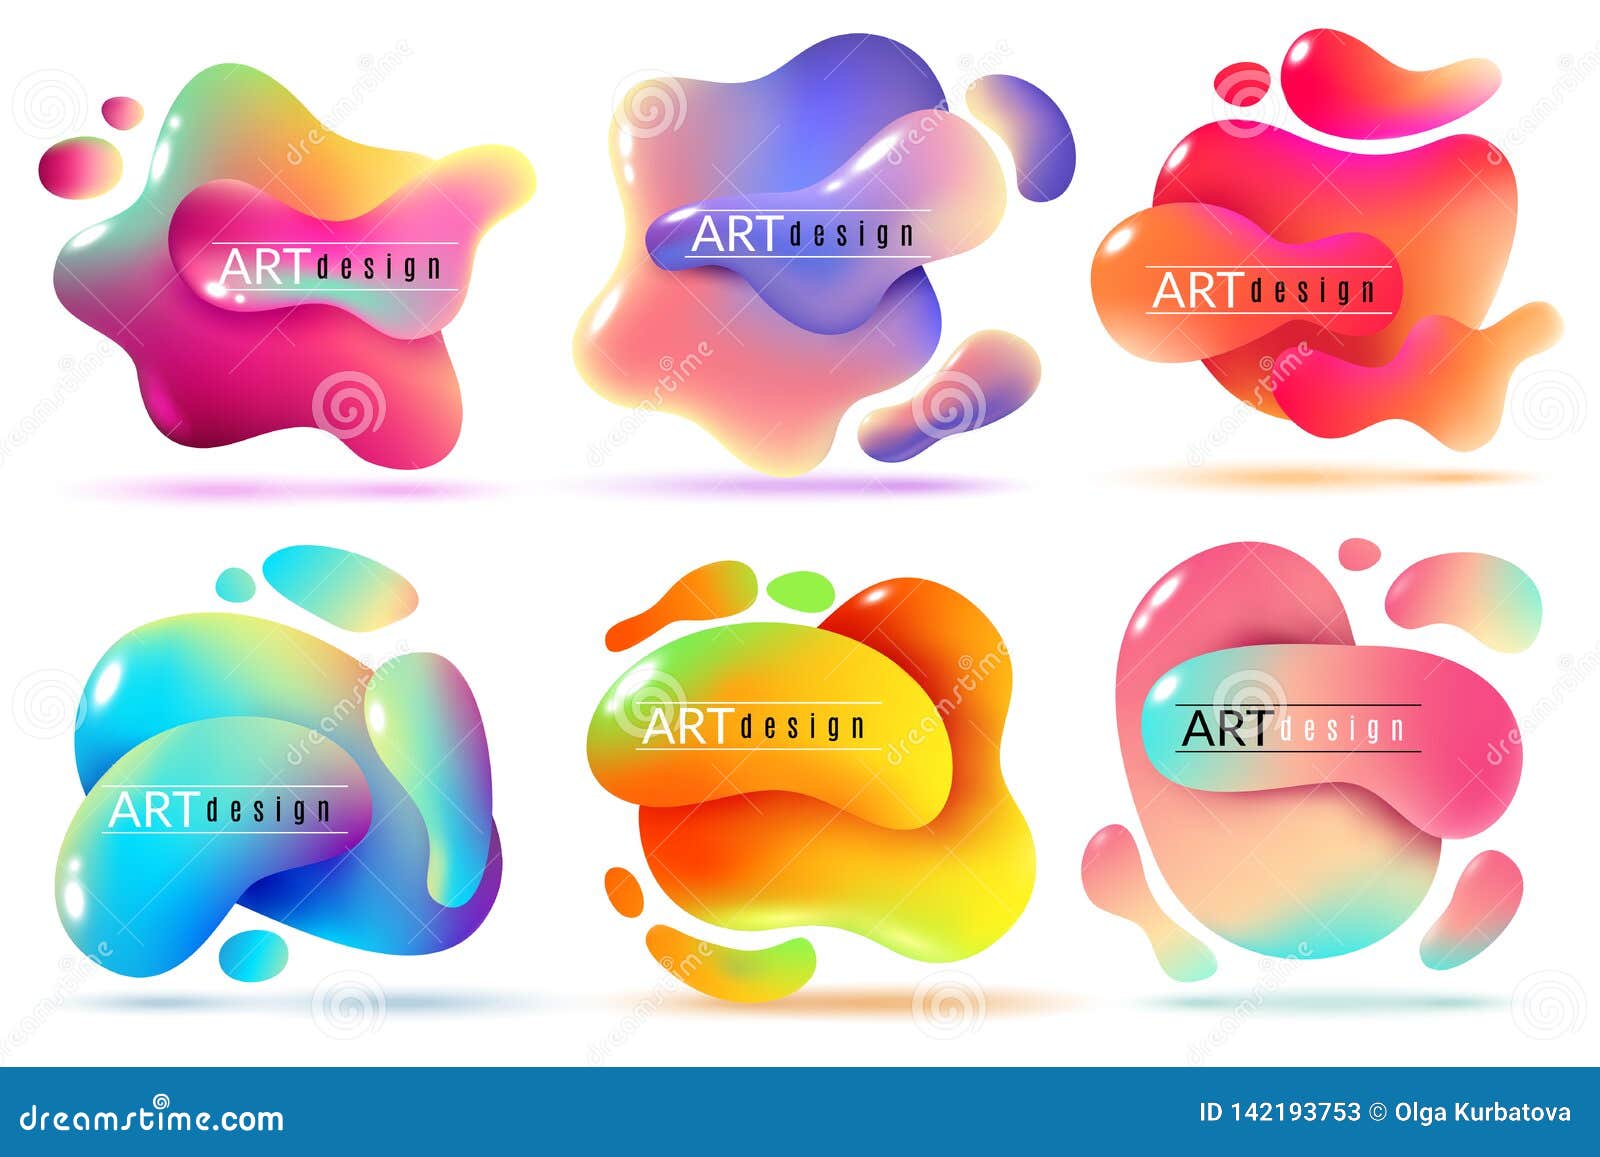 fluid  banners. liquid s abstract color flux s paint forms graphic texture modern creative stickers